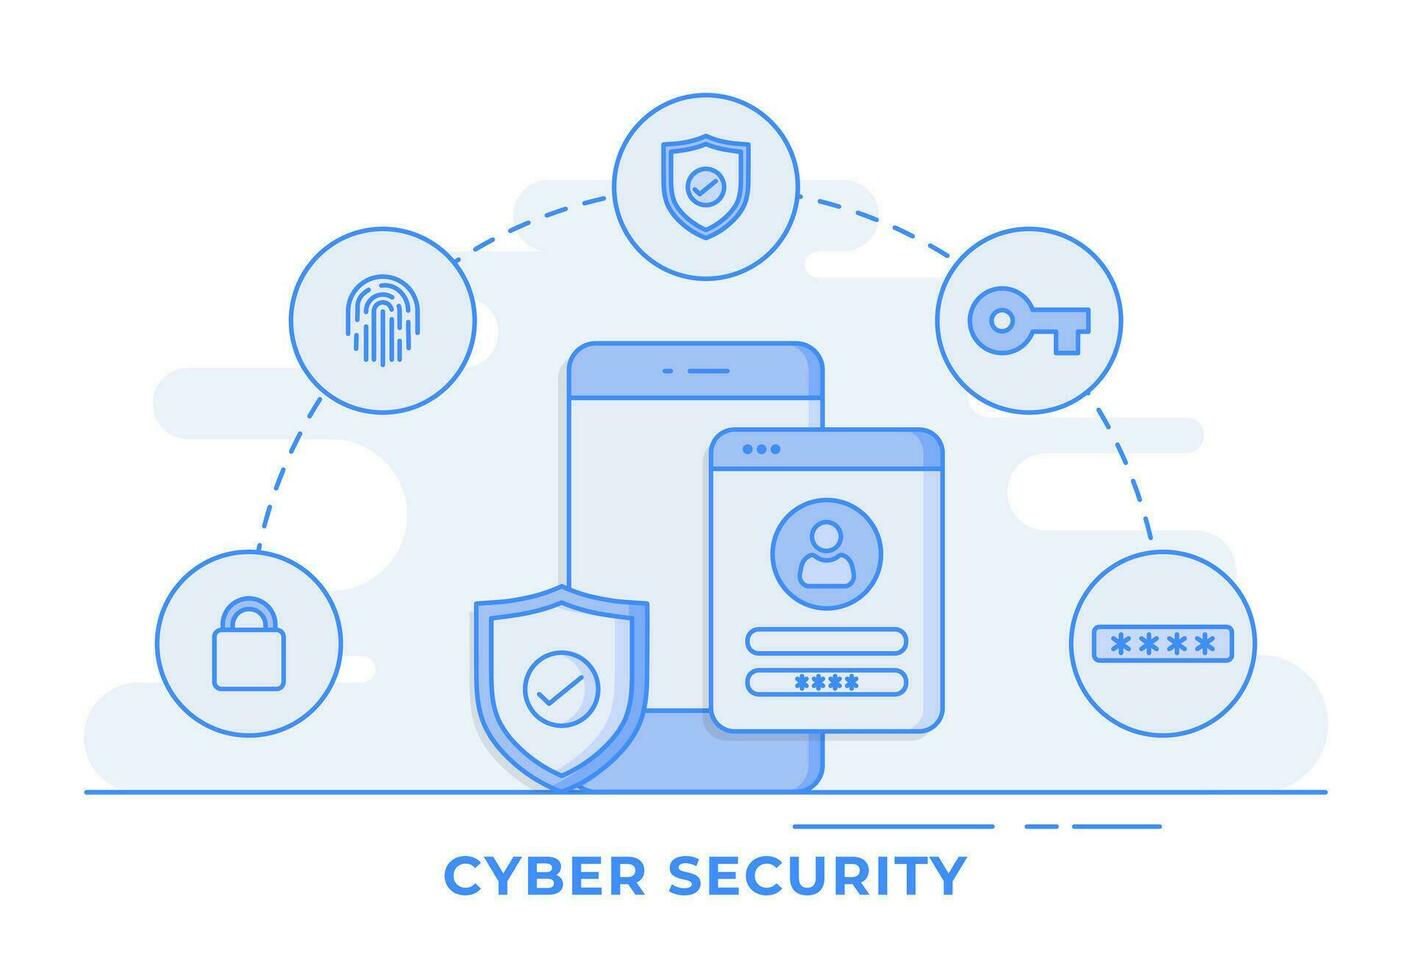 Cyber security, data security, account protection, data protection concept thin line flat illustration infographic for landing page, banner, mobile app, Web design, UI UX vector